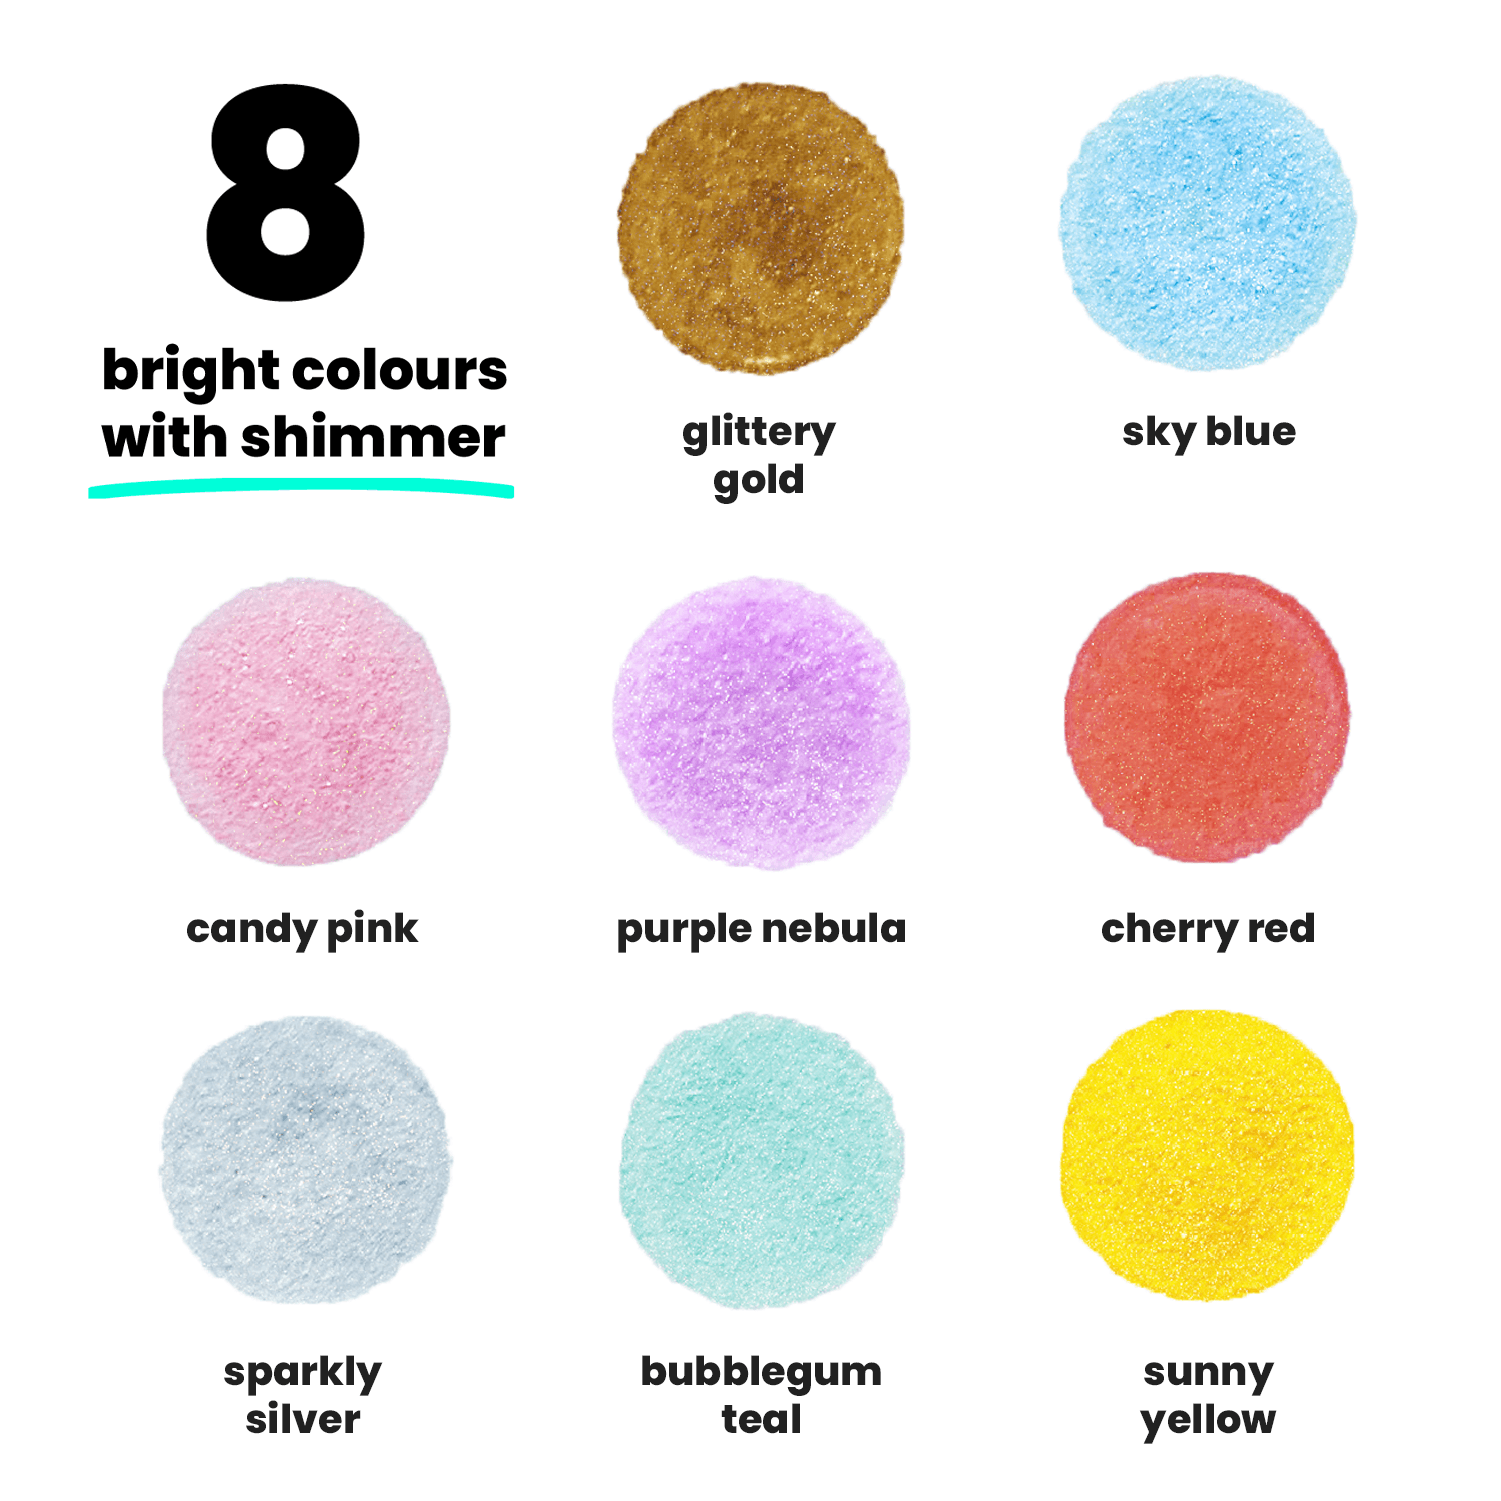 Do A Dot 5 Pack Metallic Shimmer Markers